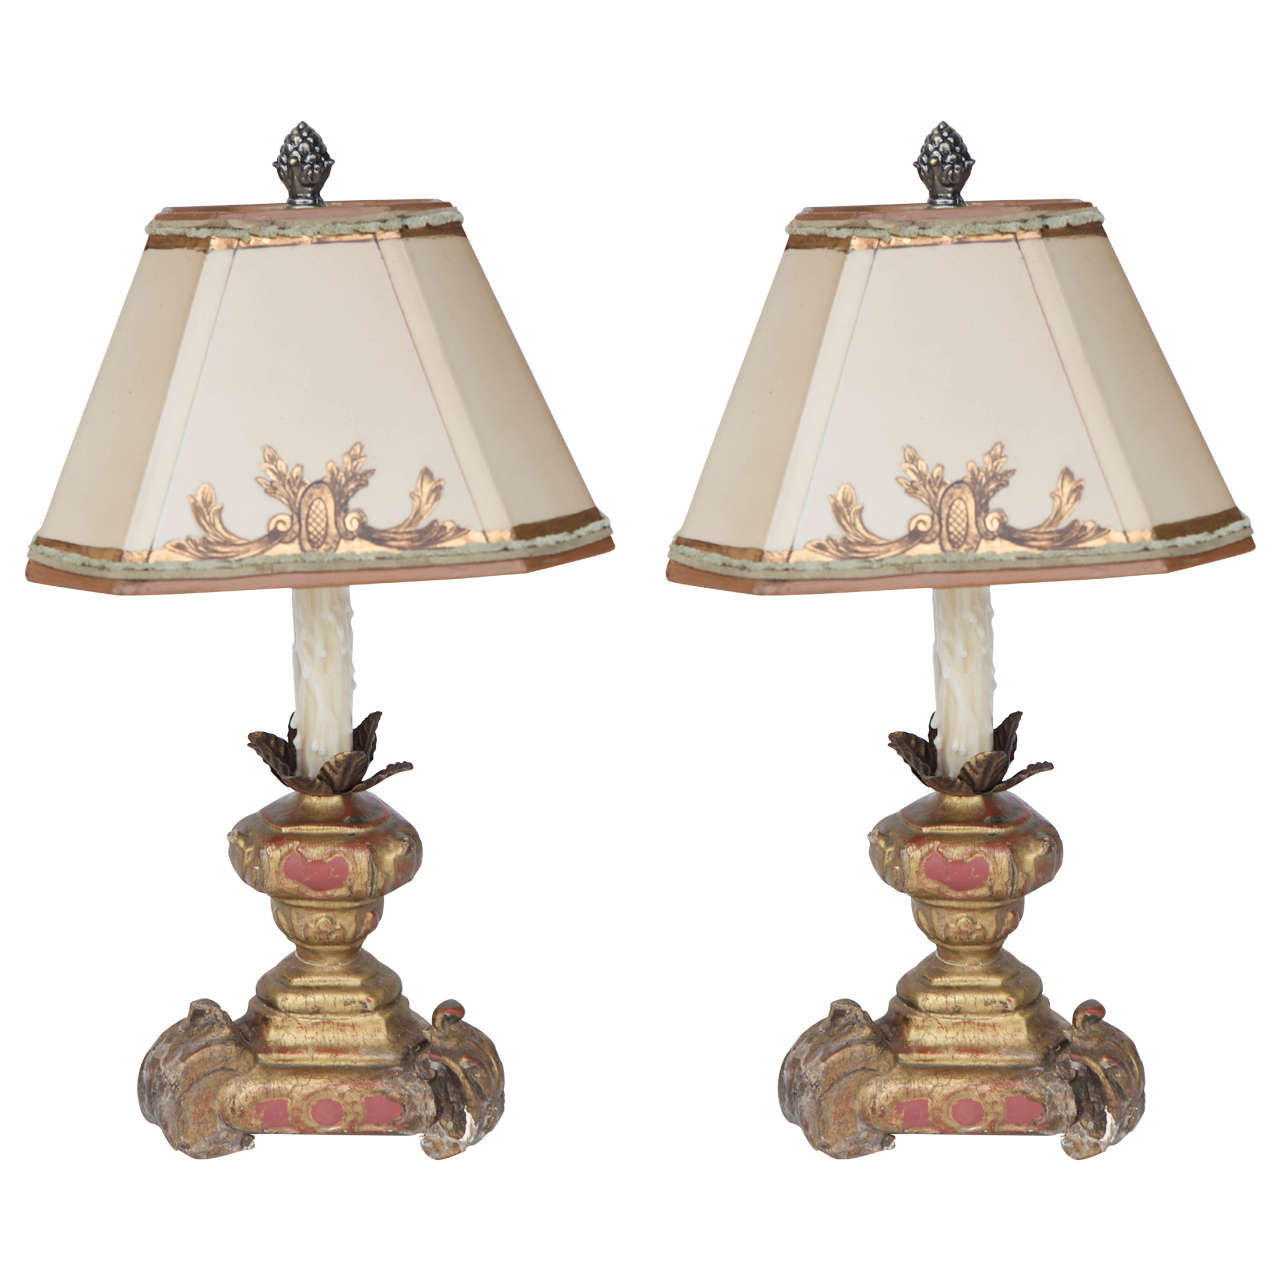 Pair of 19th Century Italian Giltwood and Painted Candle Lamps